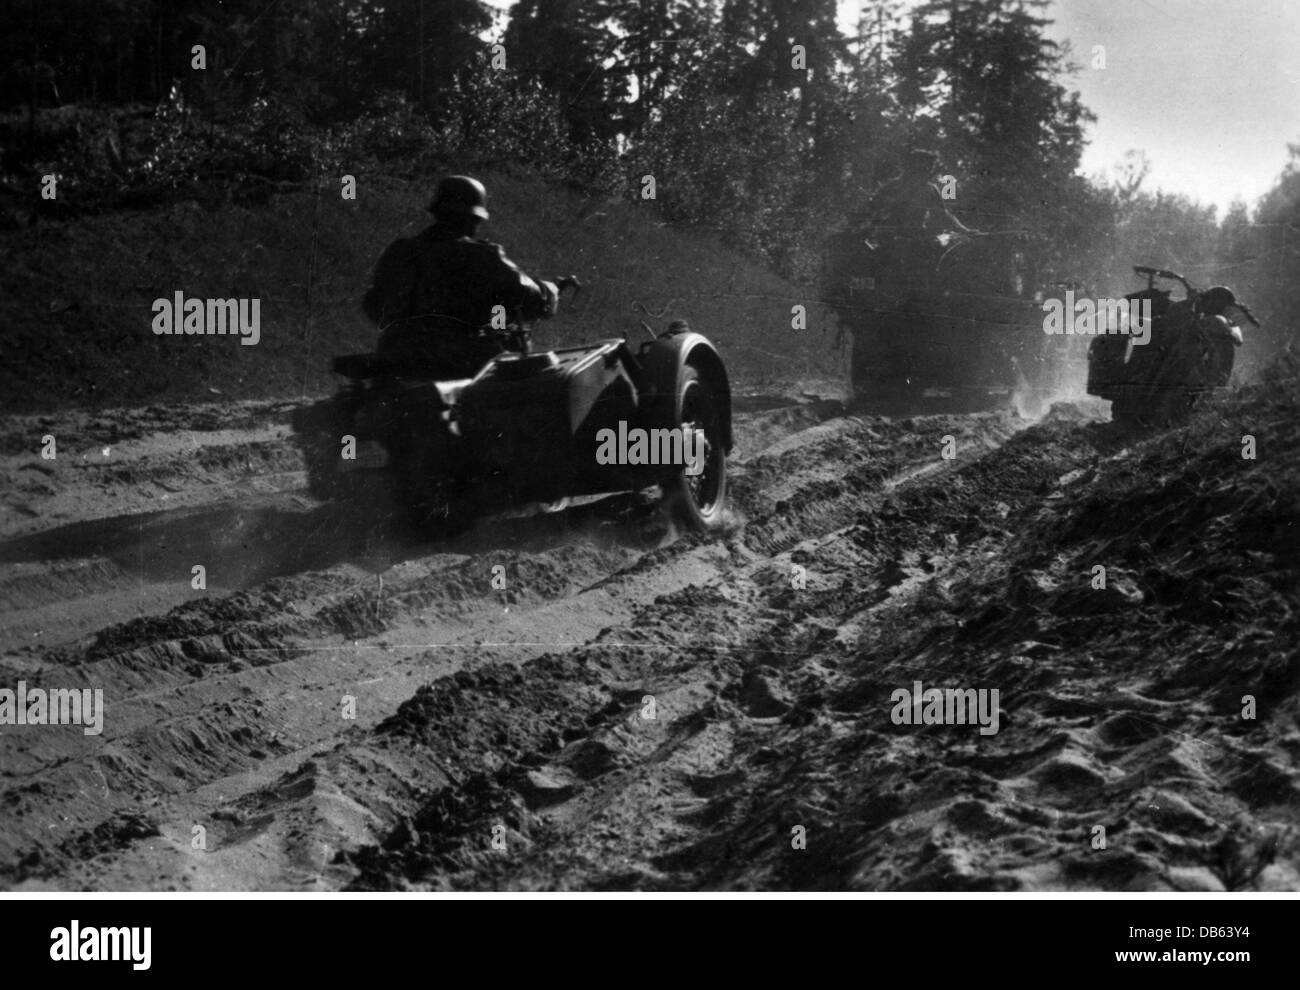 events, Second World War / WWII, Soviet Union, Operation 'Barbarossa' (German Invasion of the Soviet Union), Army Group Centre, Belarus, vehicles of the vanguard of 19th Panzer Division near Baravucha, Additional-Rights-Clearences-Not Available Stock Photo